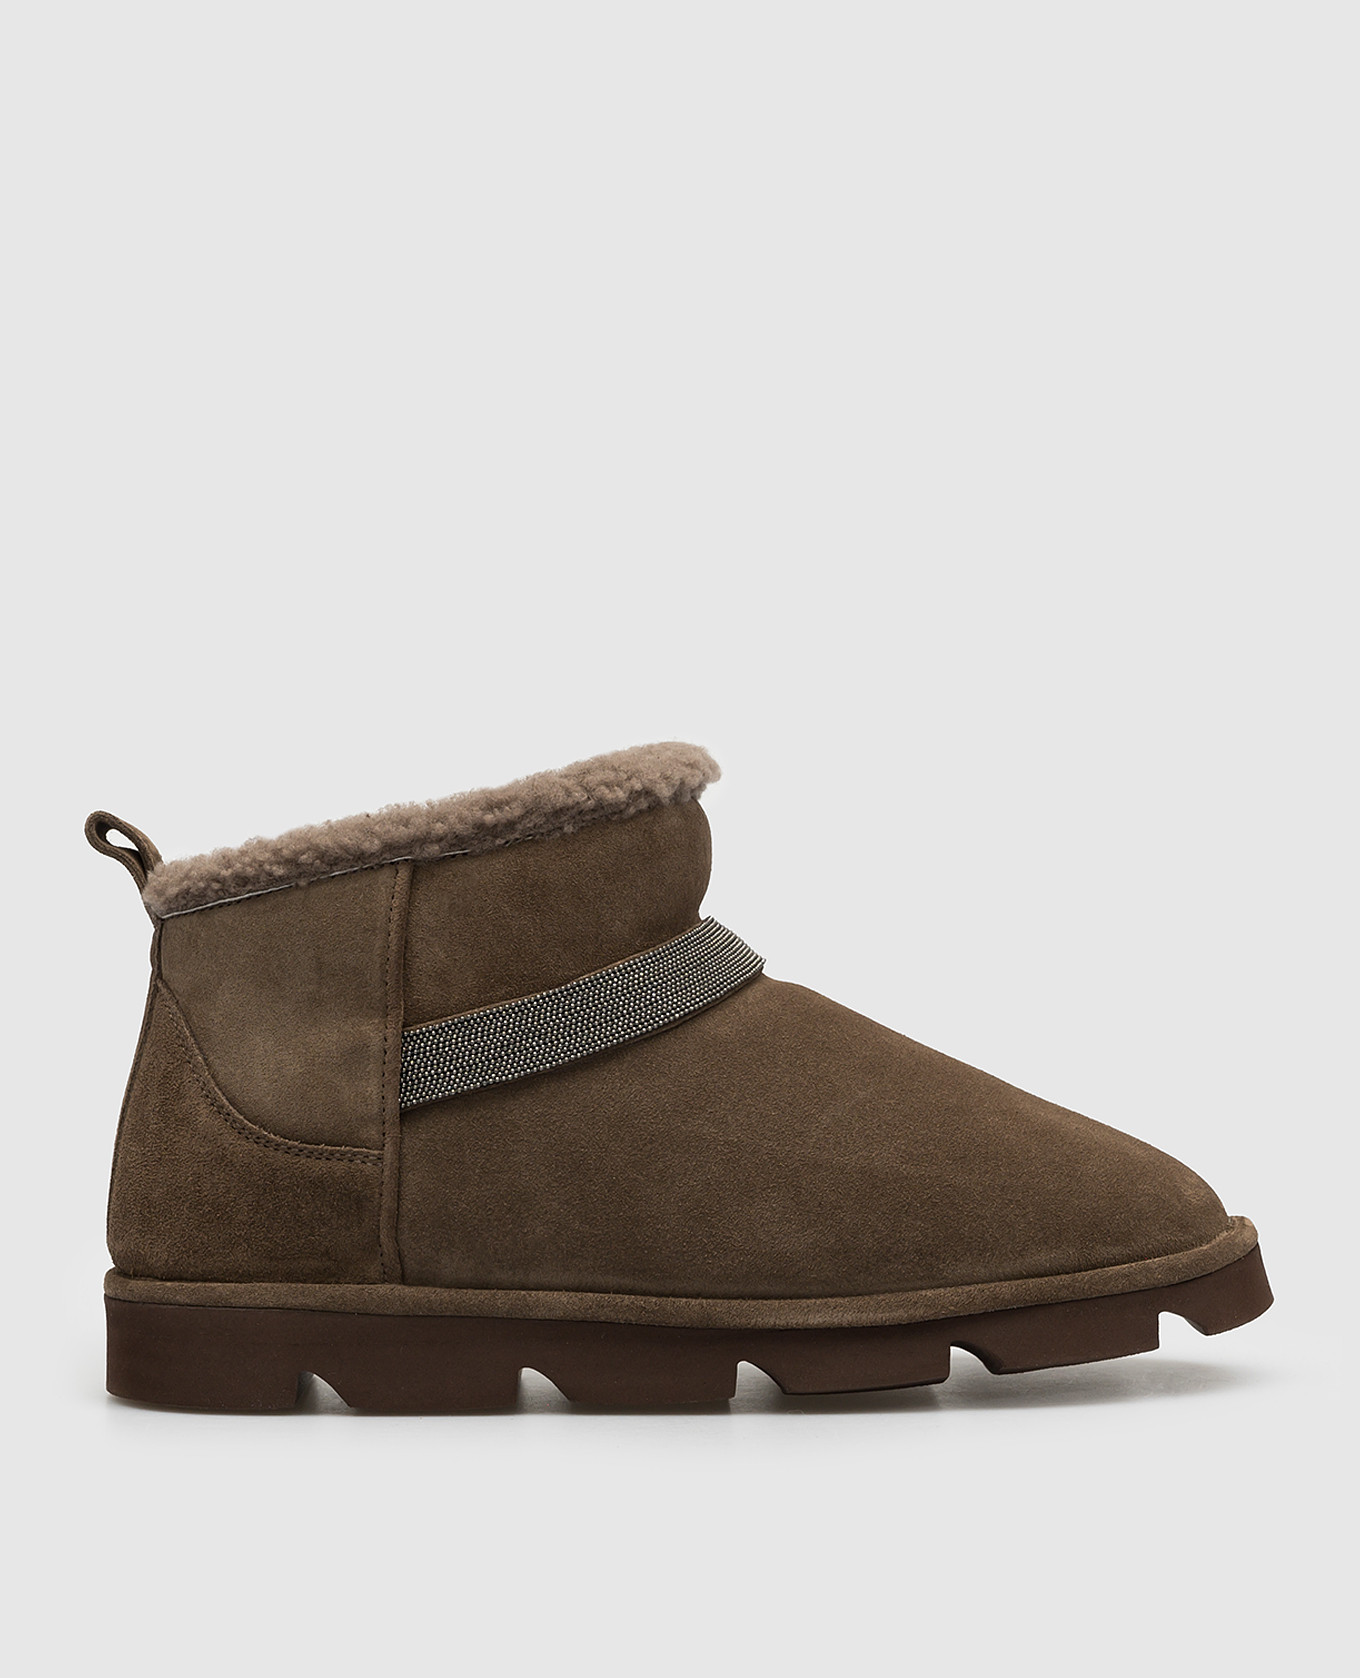 Brown suede uggs with monil chain